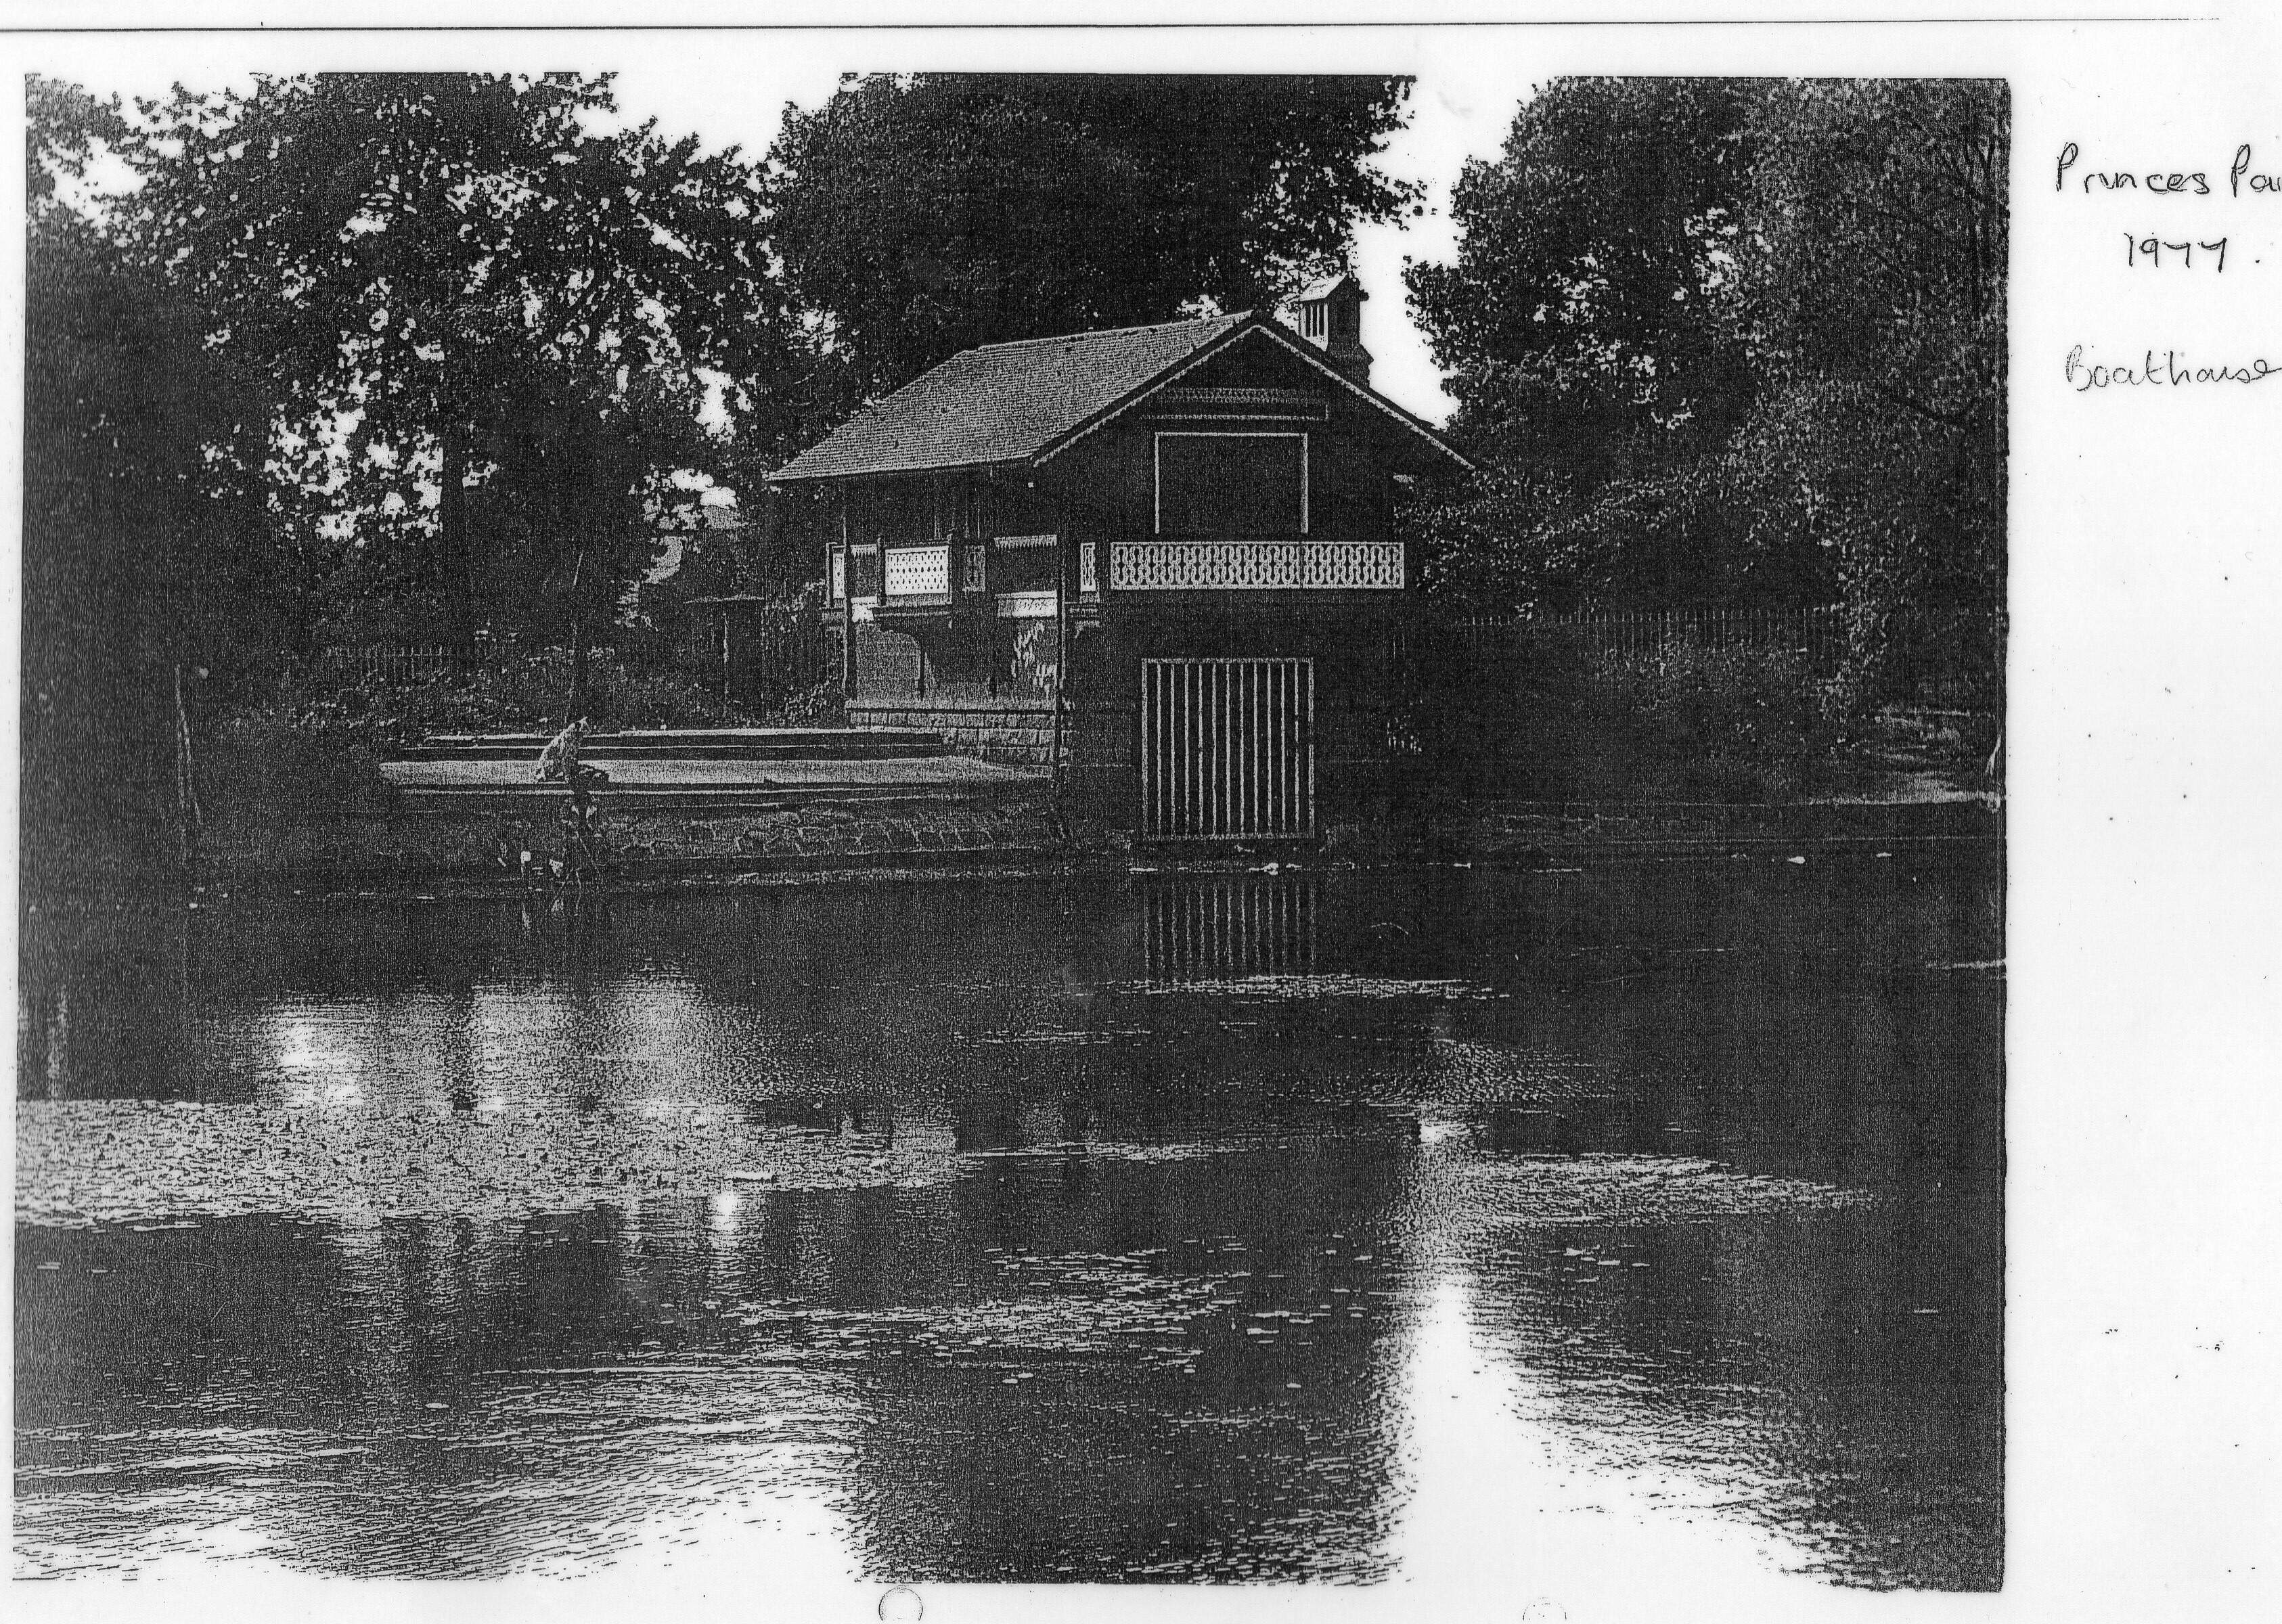 The Boathouse as it was